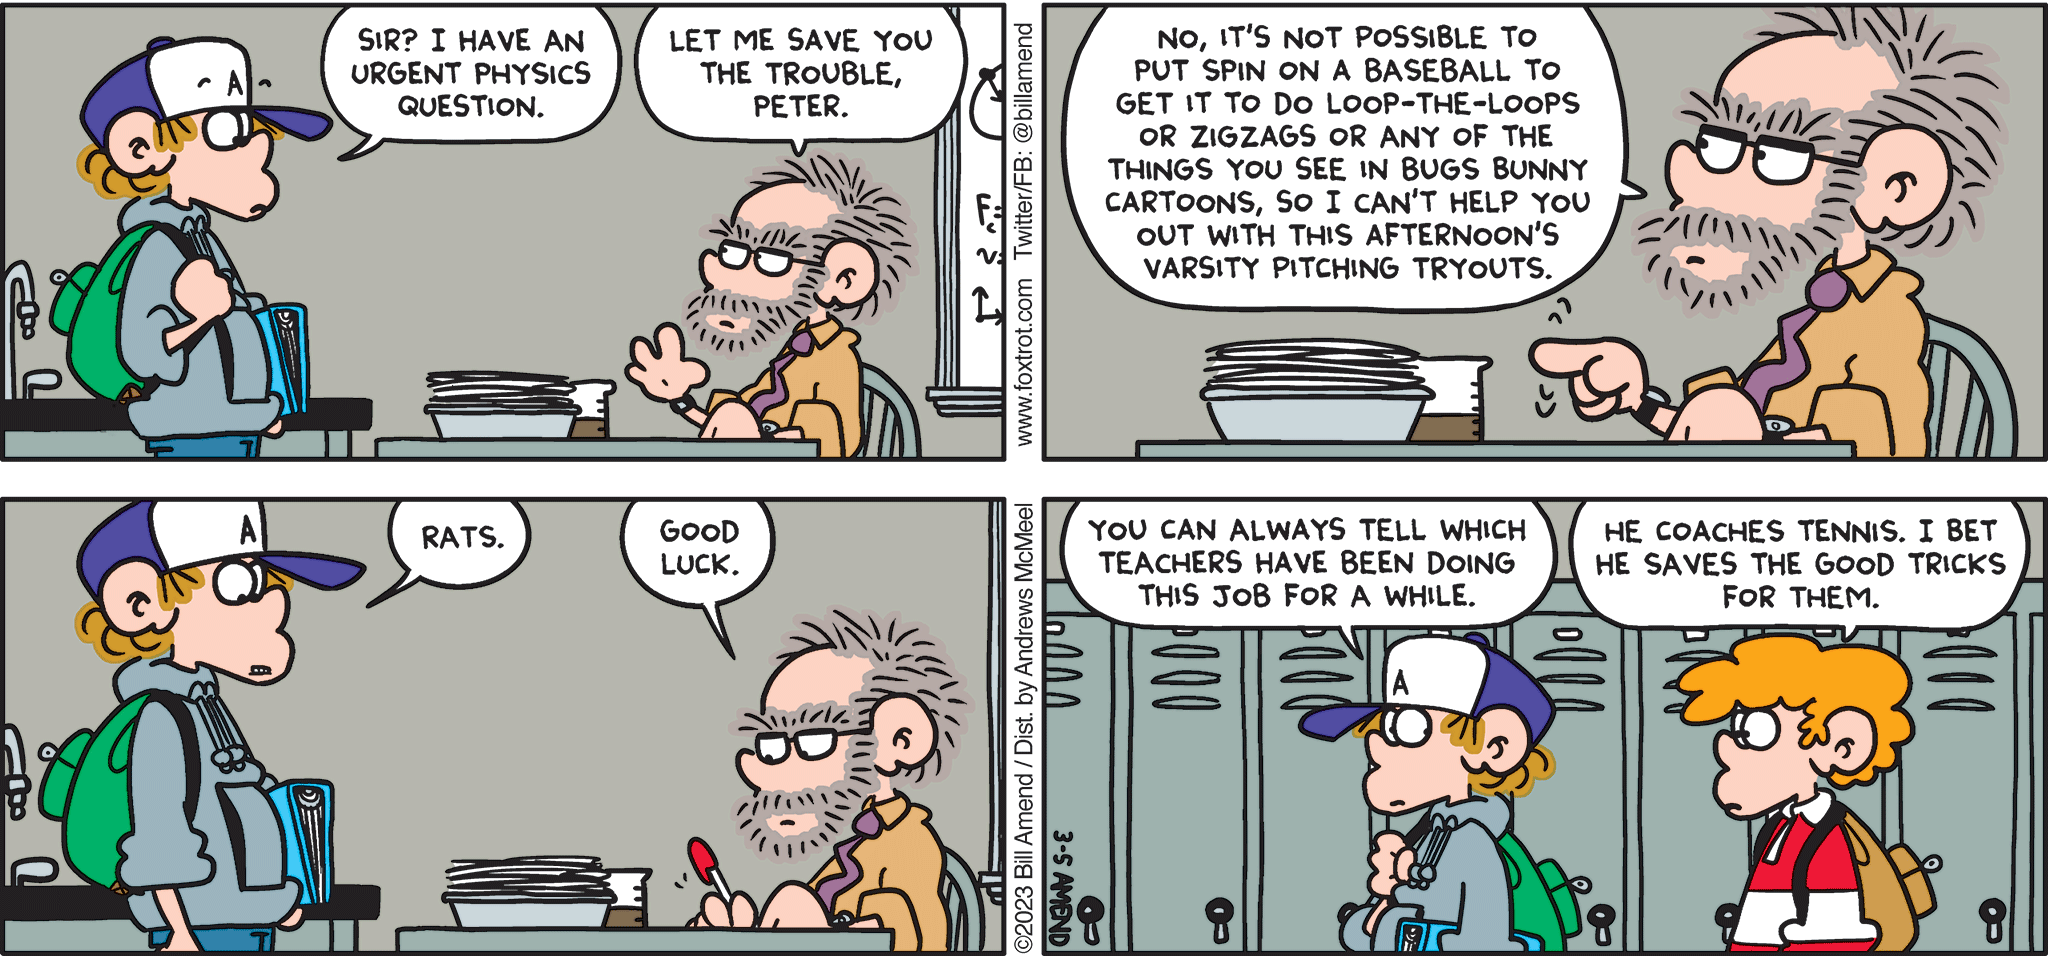 FoxTrot comic strip by Bill Amend - "Bugsball" published March 5, 2023 - Transcript: Peter Fox: Sir? I have an urgent physics question. Teacher: Let me save you the trouble, Peter. No It's not possible to put spin on a baseball to get it to do loop-the-loops or zigzags or any of the things you see in Bugs Bunny cartoons, so I can't help you out with this afternoon's varsity pitching tryouts. Peter Fox: Rats. Teacher: Good luck. Peter Fox: You can always tell which teachers have been doing this job for a while. Steve: He coaches tennis. I bet he saves the good tricks for them. 